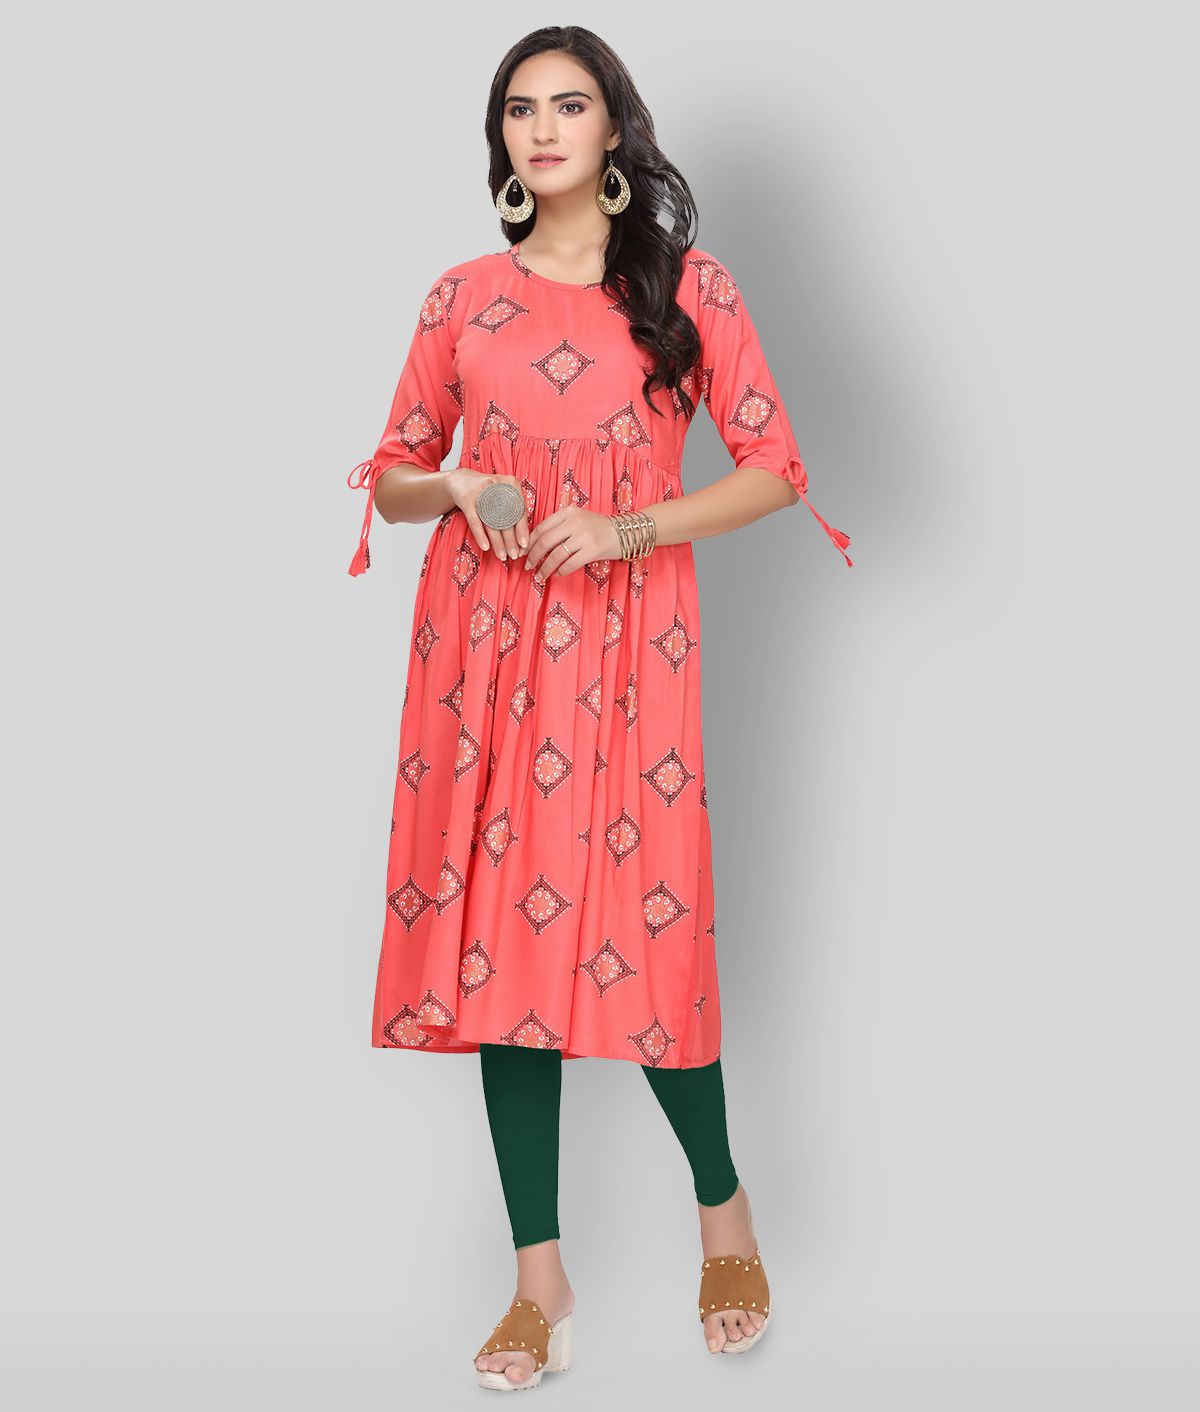 Lee Moda  Pink Rayon Womens Straight Kurti  Buy Lee Moda  Pink Rayon  Womens Straight Kurti Online at Best Prices in India on Snapdeal